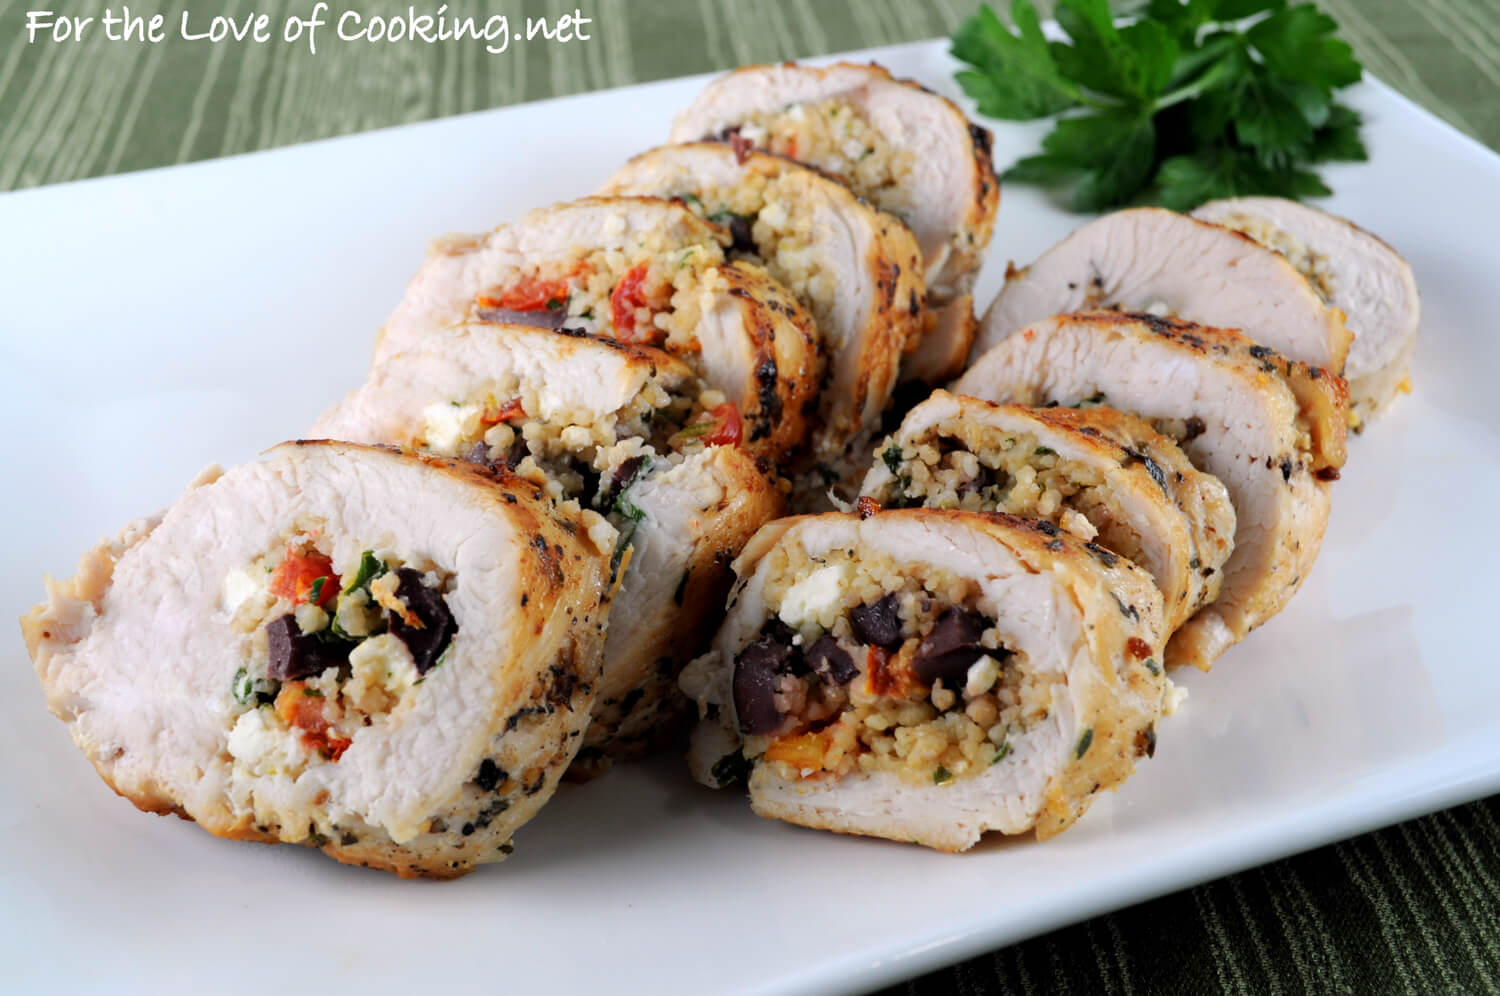 Couscous Stuffed Chicken Breasts